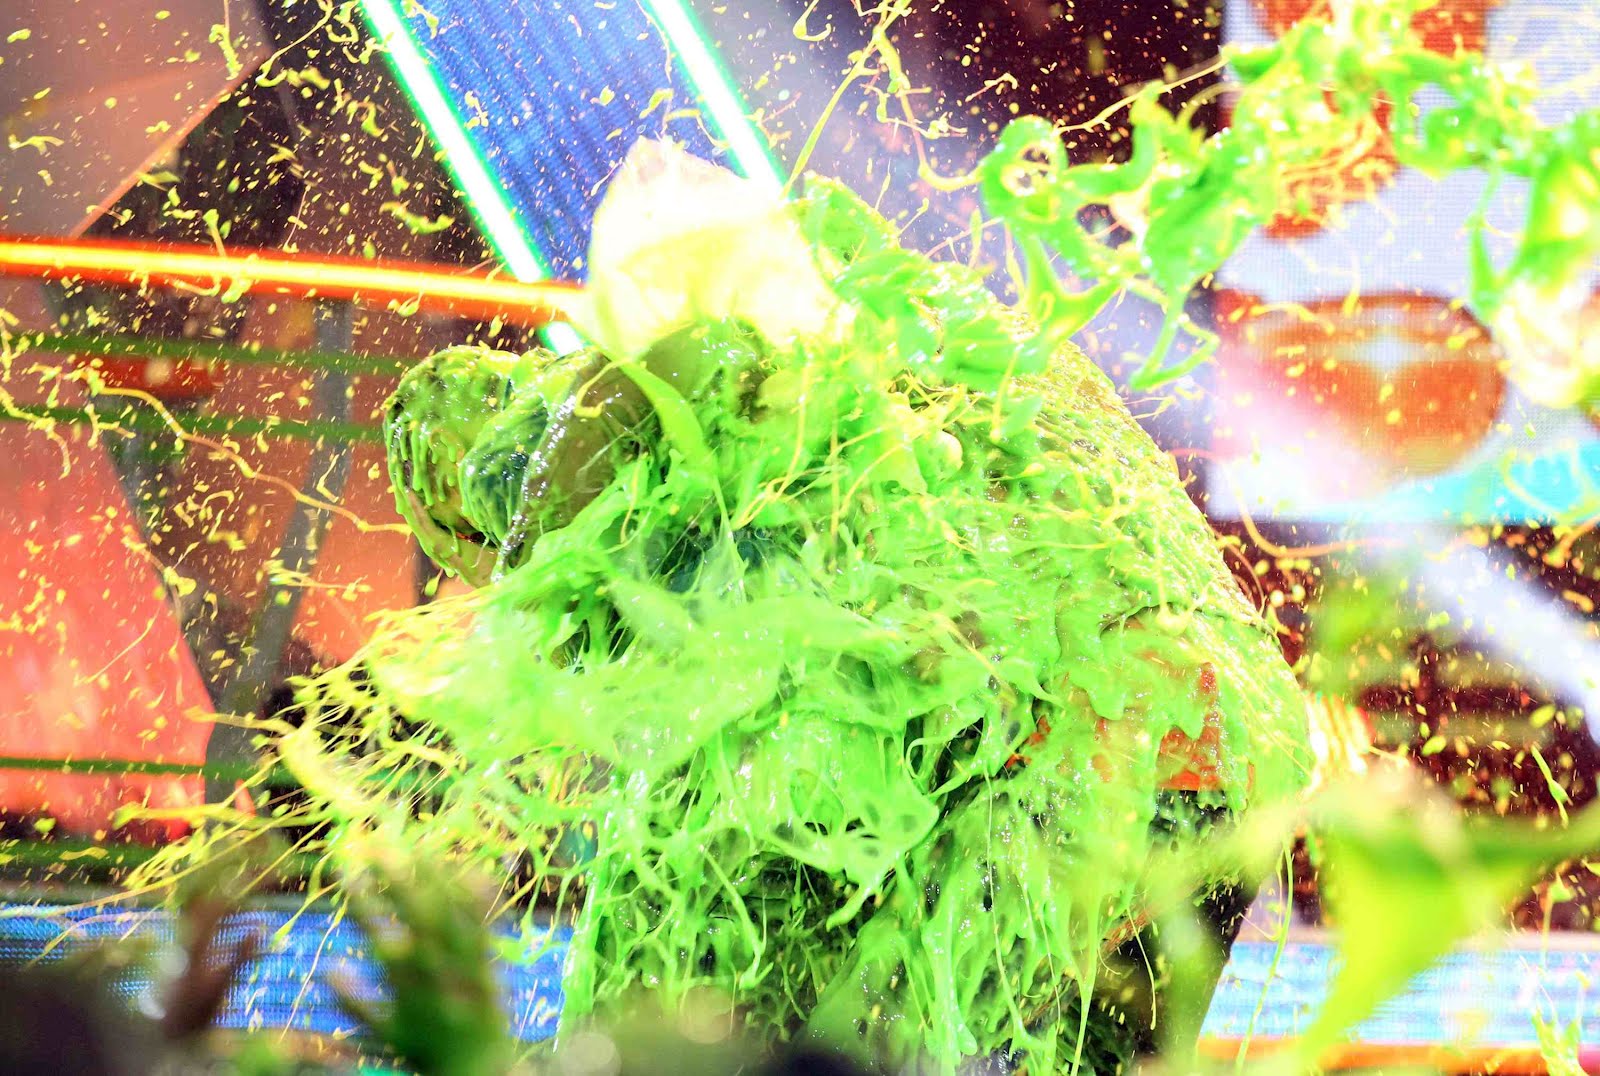 Justin Bieber Gets Slimed At 2012 Nickelodeon KCAs!1600 x 1076